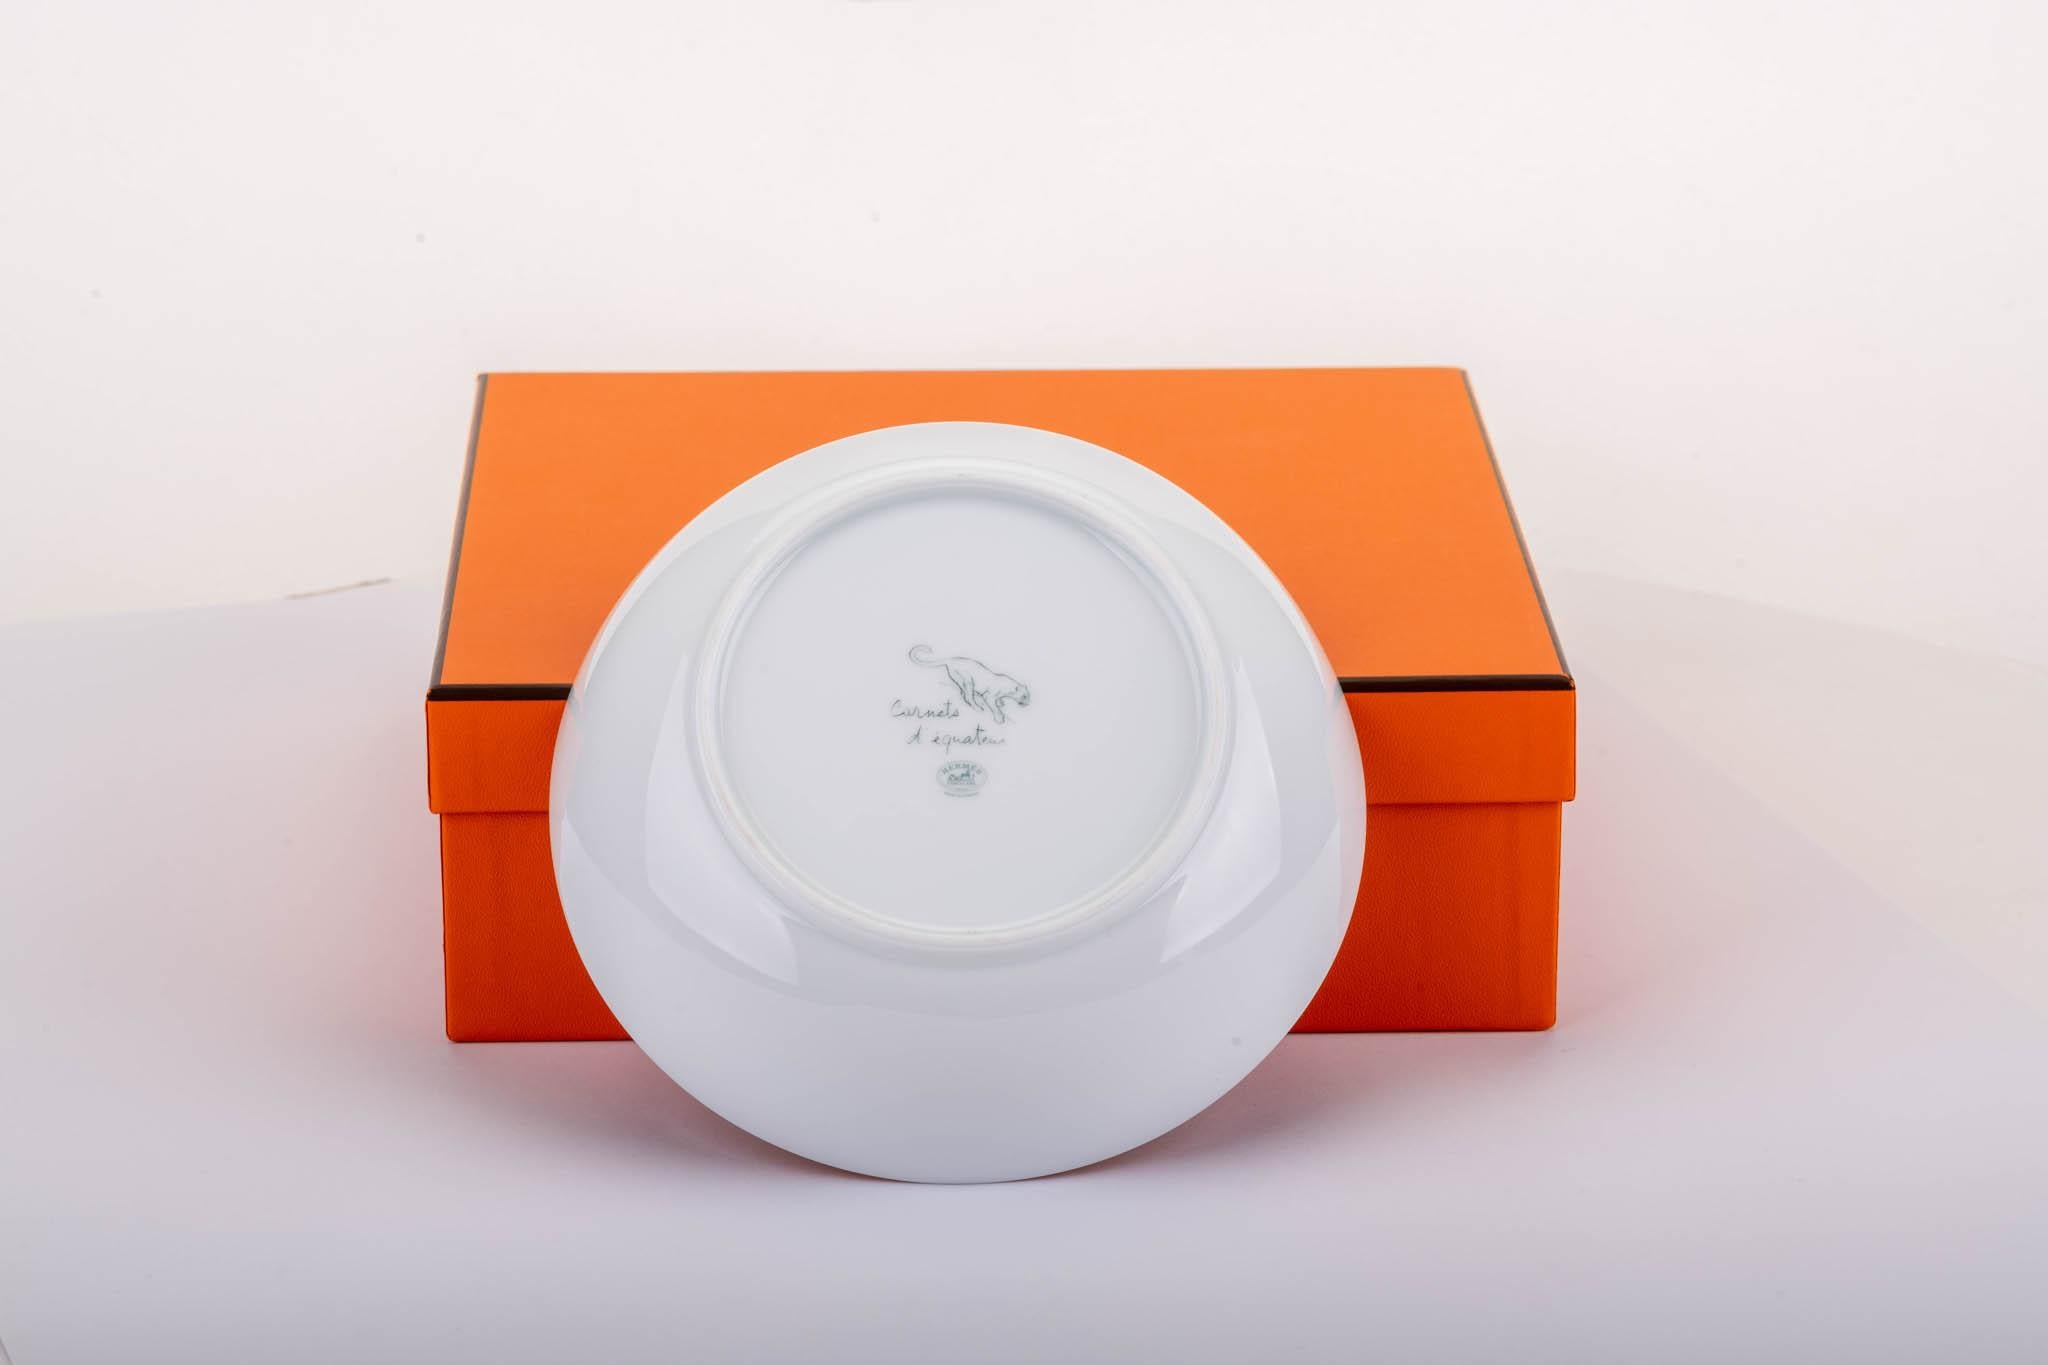 Hermes brand new in box equateur porcelain box. Comes with original box.